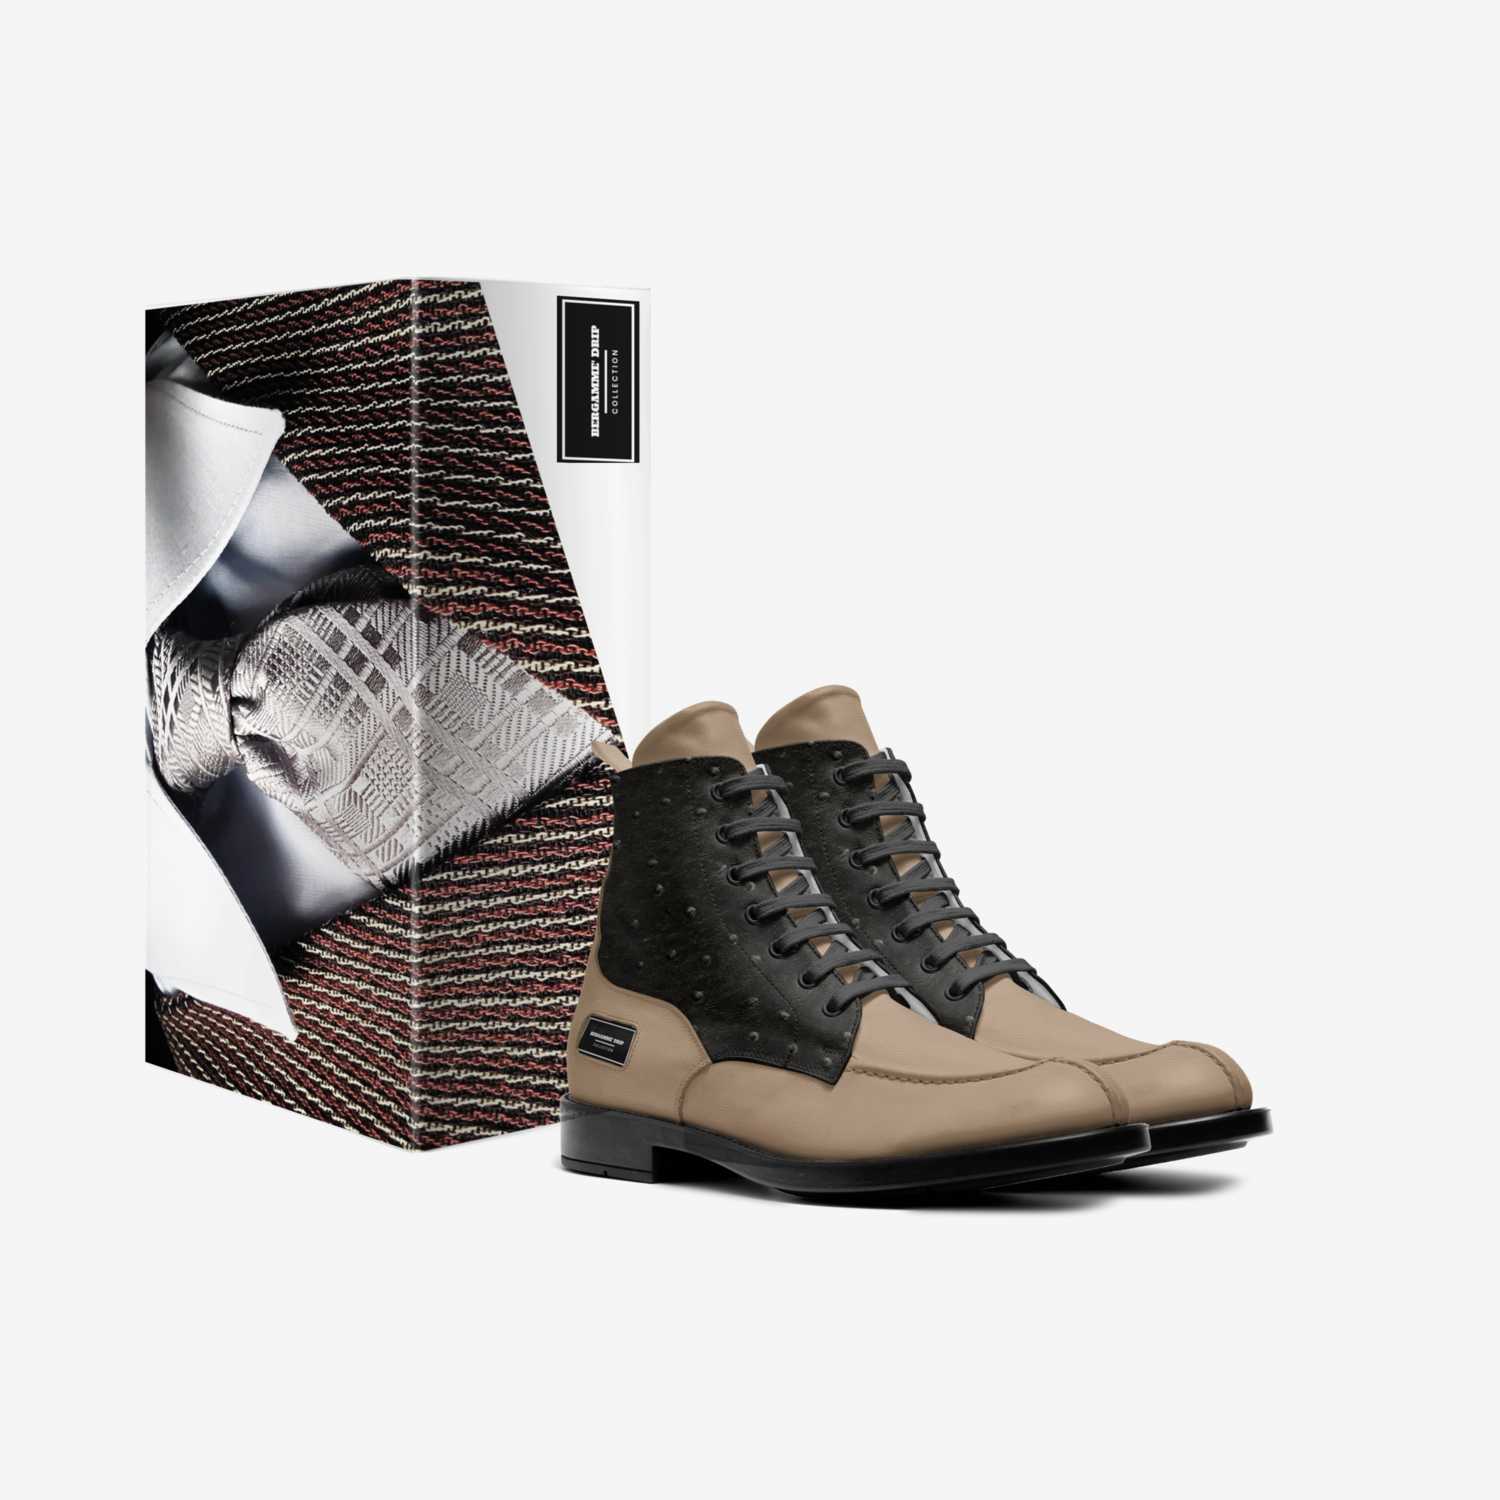 Bergamme' Drip custom made in Italy shoes by Bergamme Bergamme | Box view